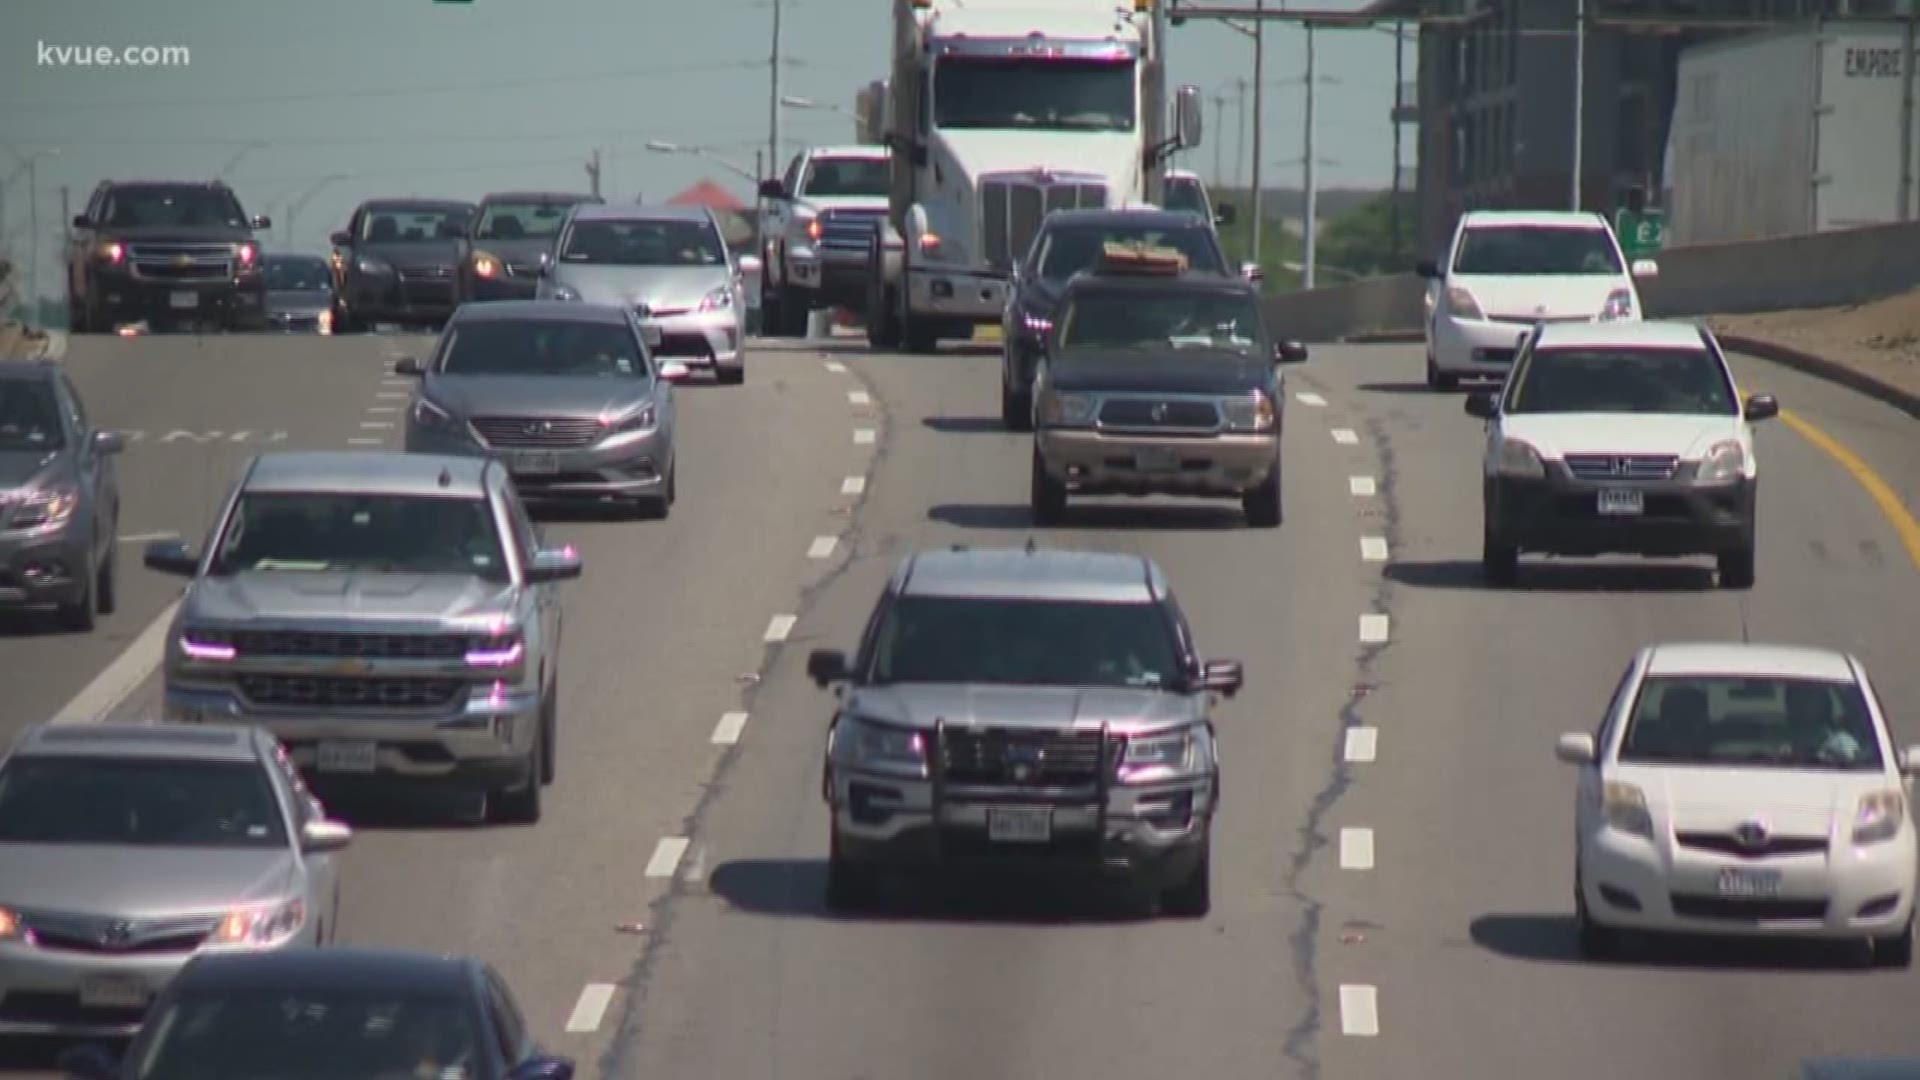 The Downtown Alliance is asking people to contact their state leaders to add more toll lanes with the hopes of finding a traffic solution.